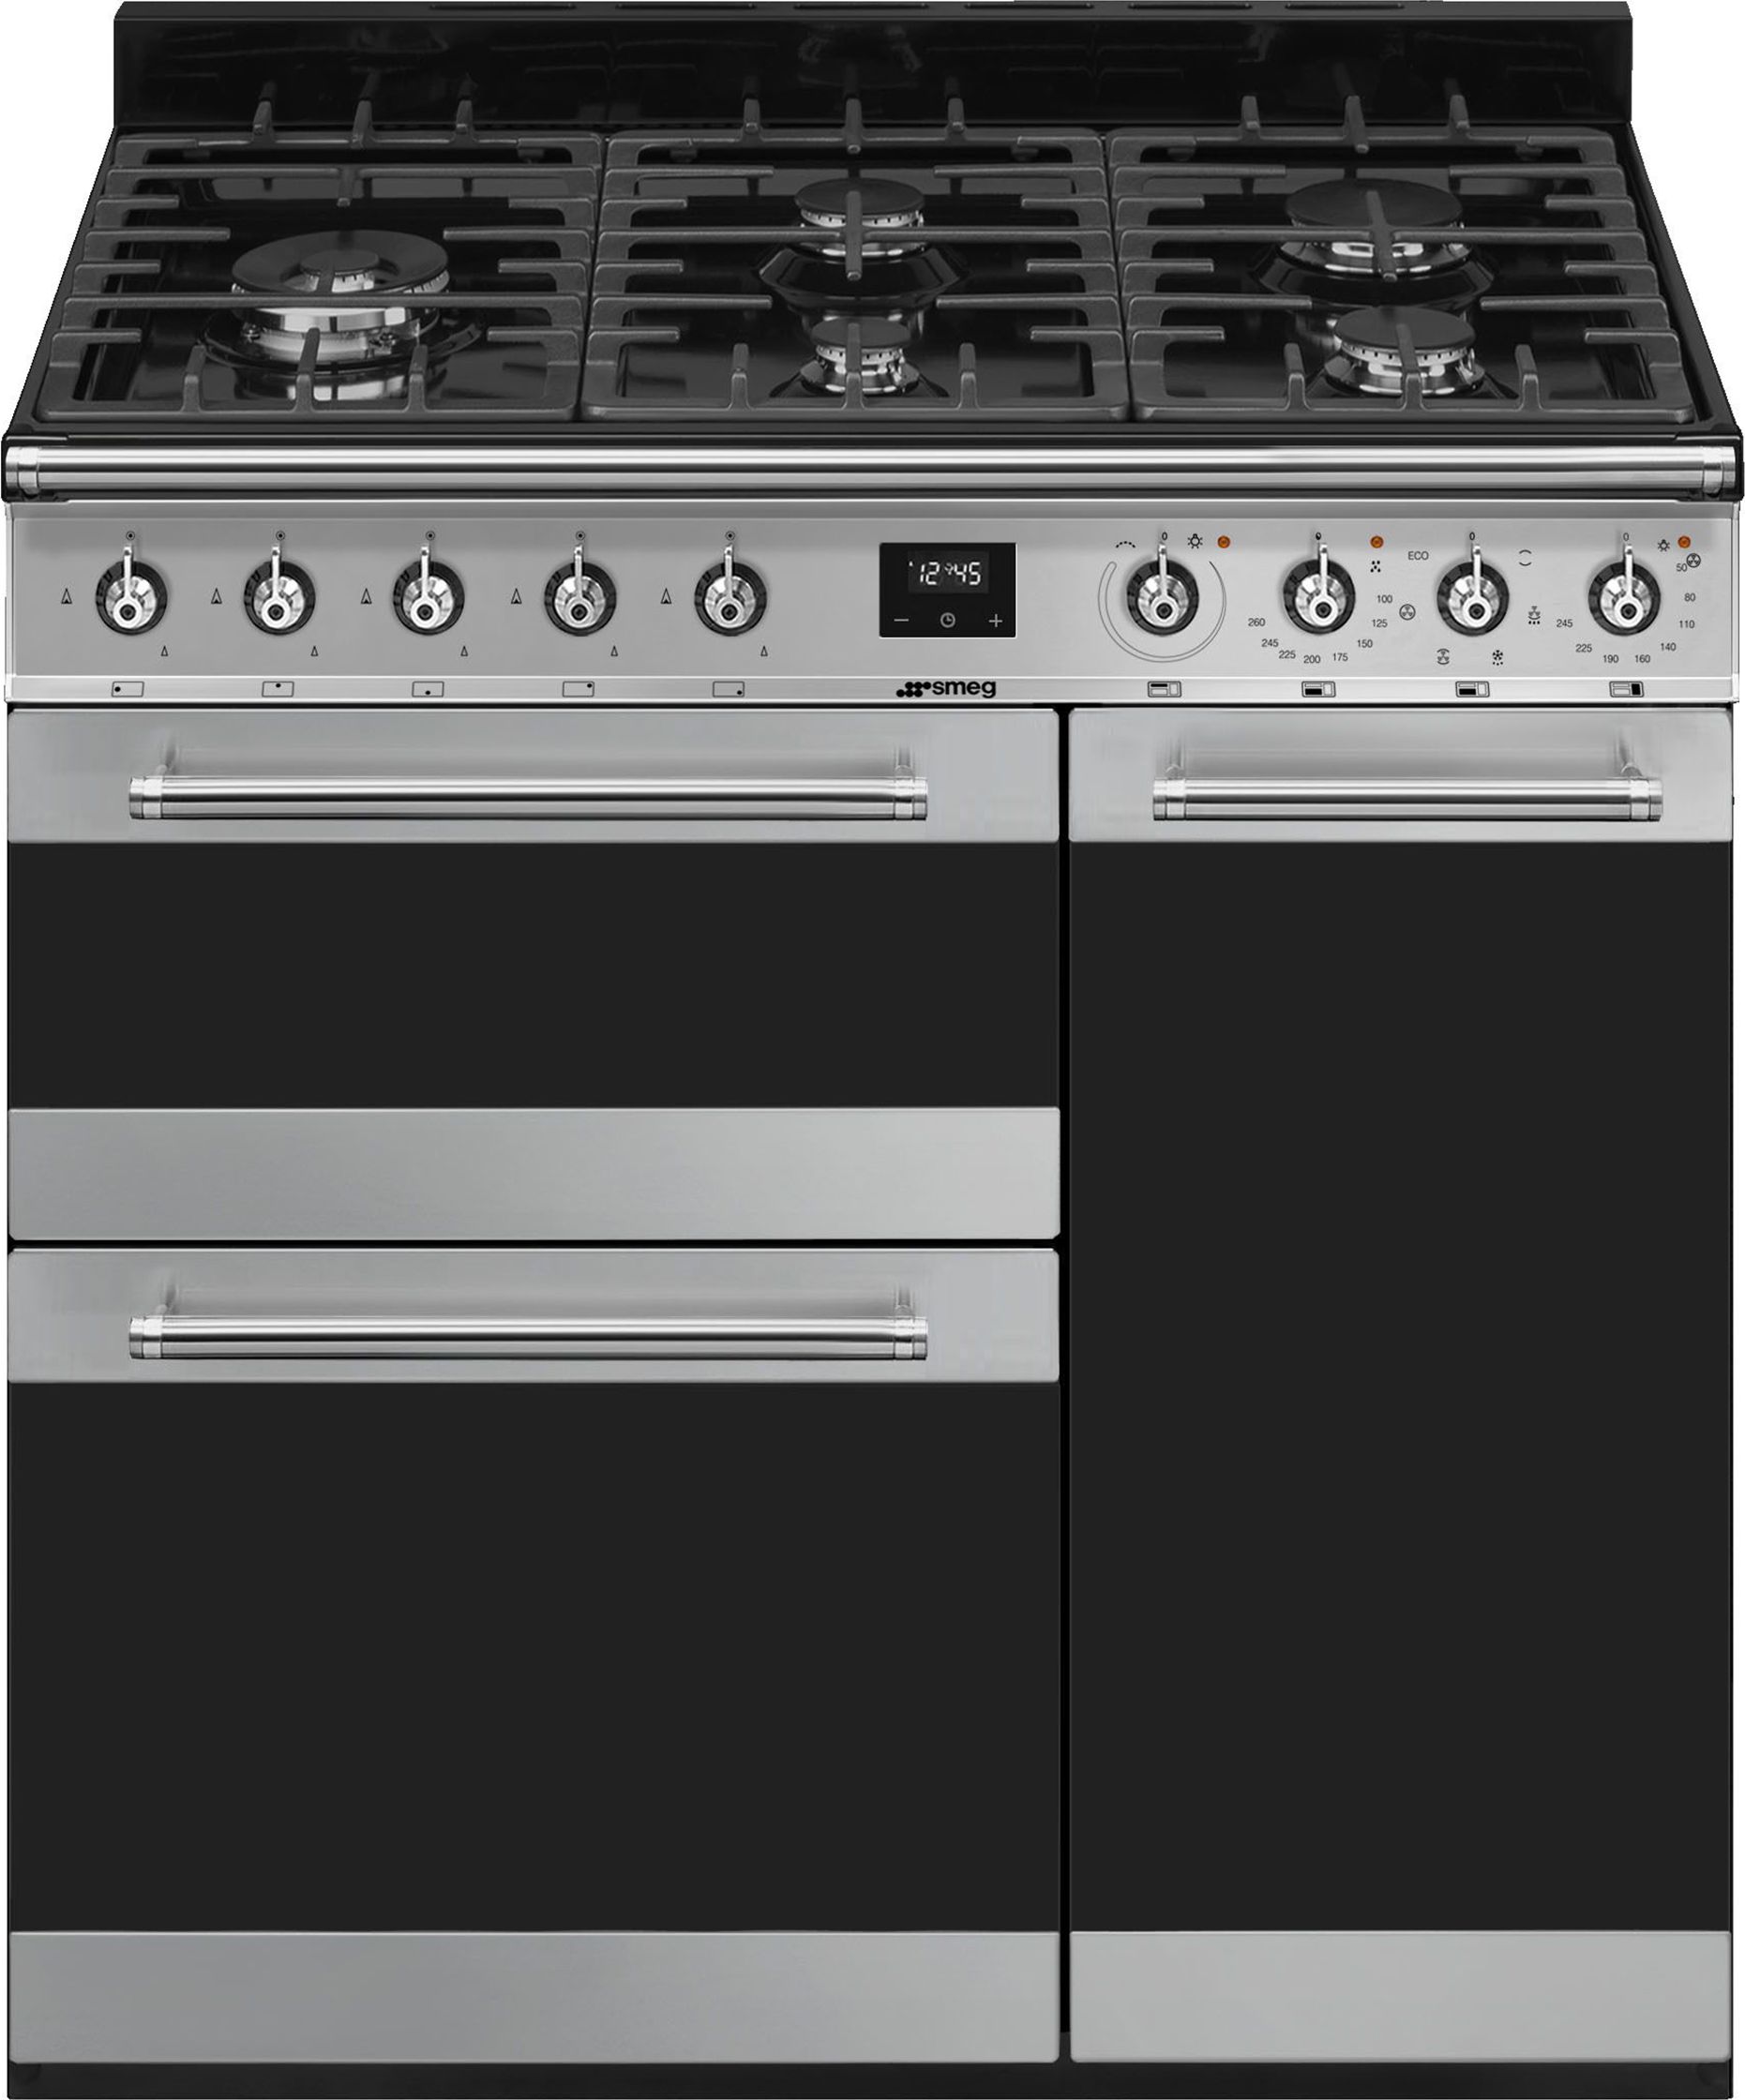 Smeg Symphony SY93-1 Dual Fuel Range Cooker - Stainless Steel - A/B Rated, Stainless Steel